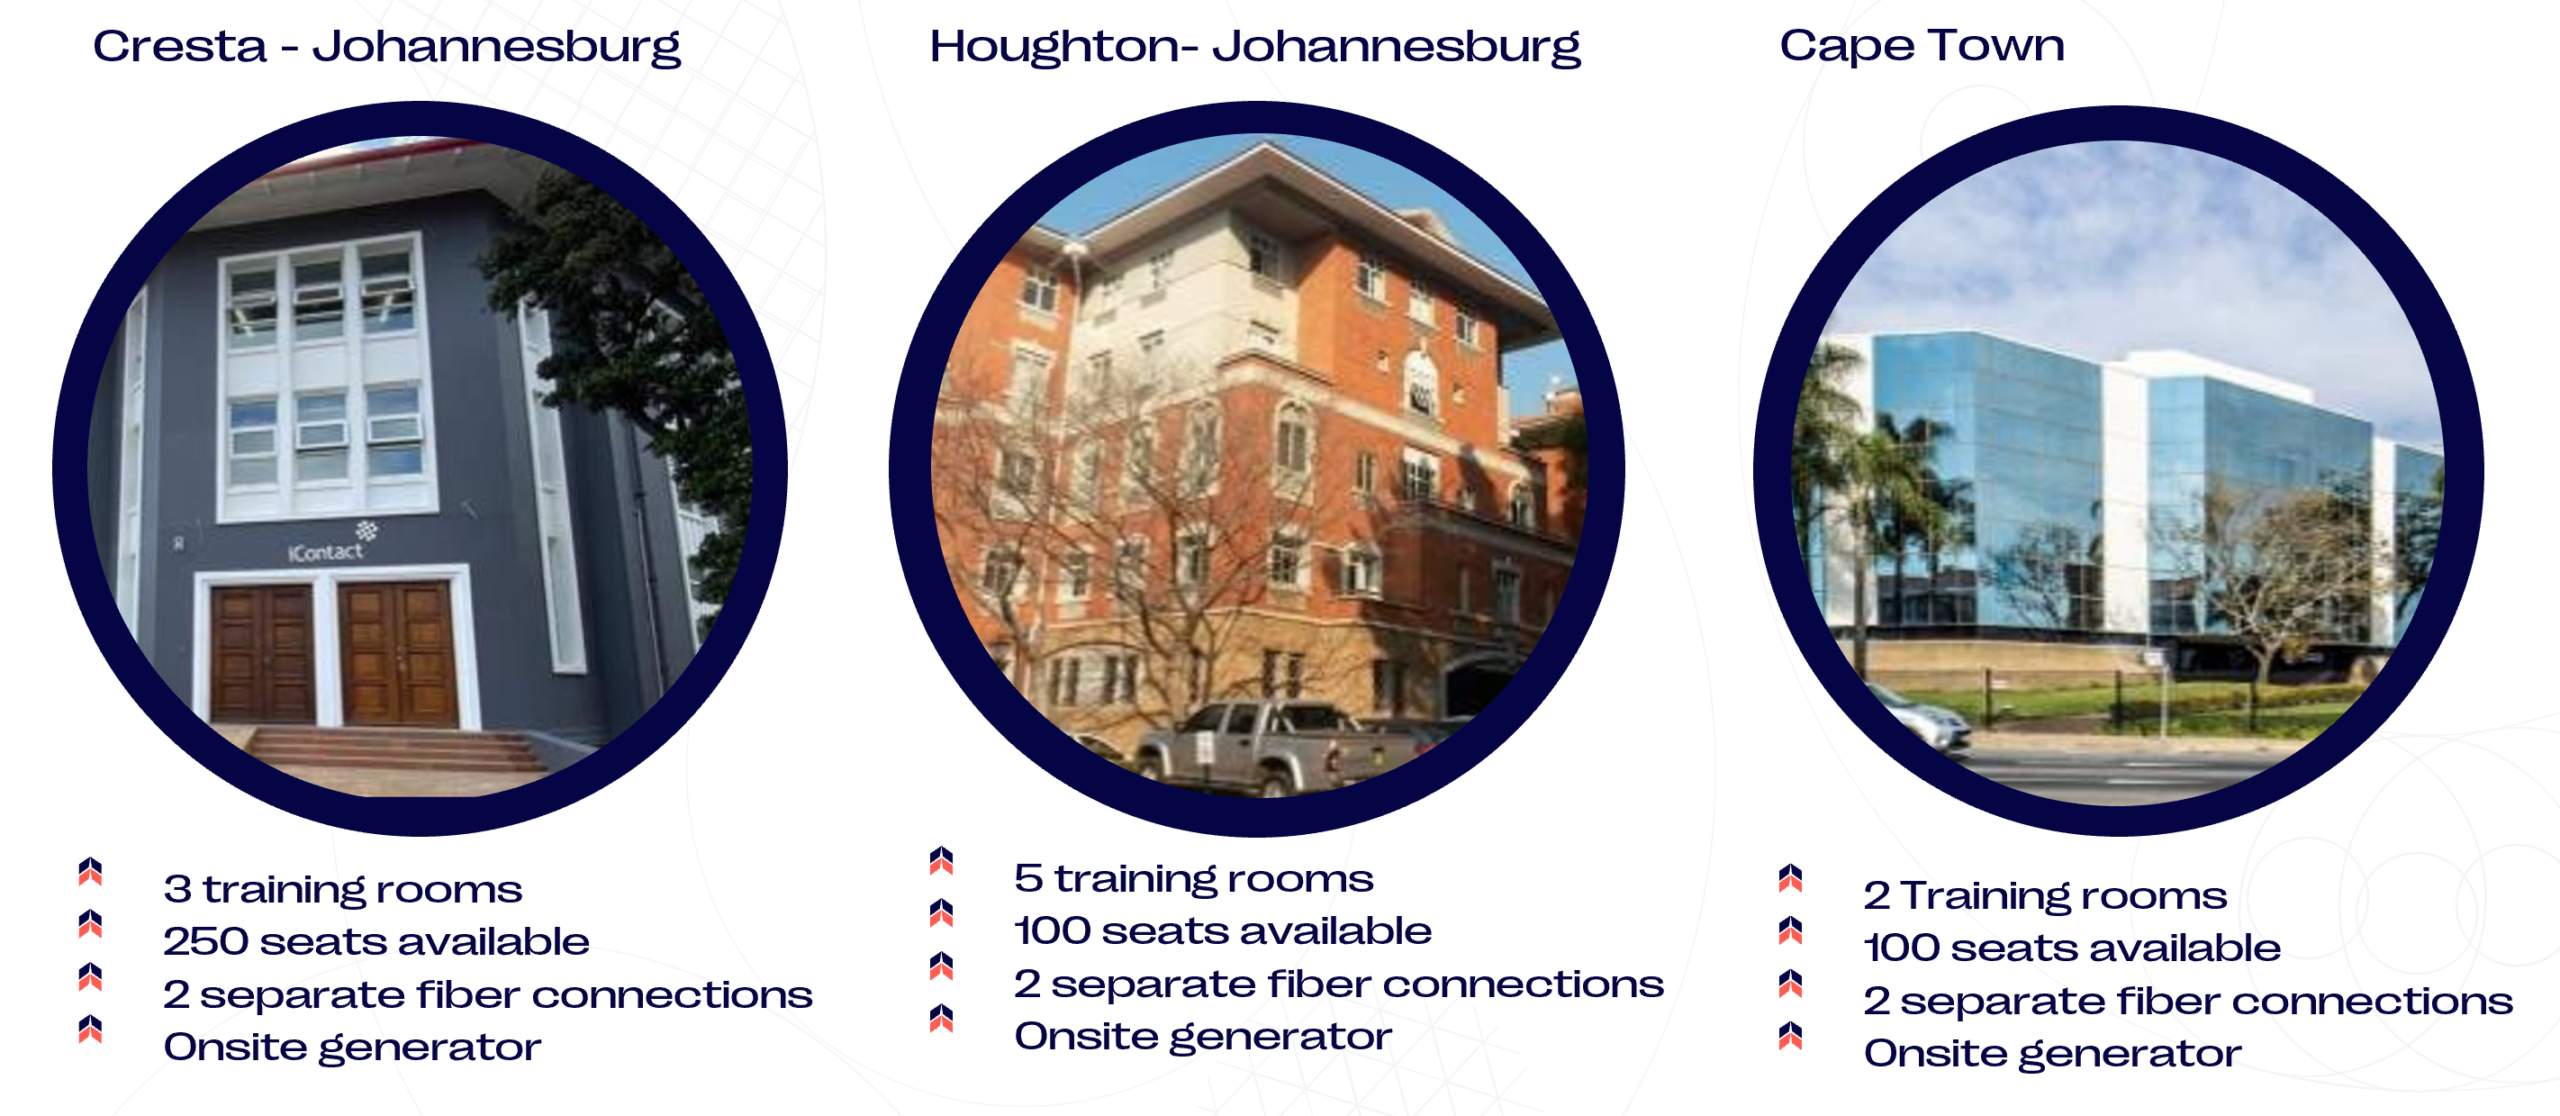 Cresta - Johannesburg: 3 training rooms, 250 seats available, 2 separate fiber connections, onsite generator Houghton - Johannesburg: 5 training rooms, 100 seats available, 2 separate fiber connections, onsite generator Cape Town 2 training rooms, 100 seats available, 2 separate fiber connections, onsite generator